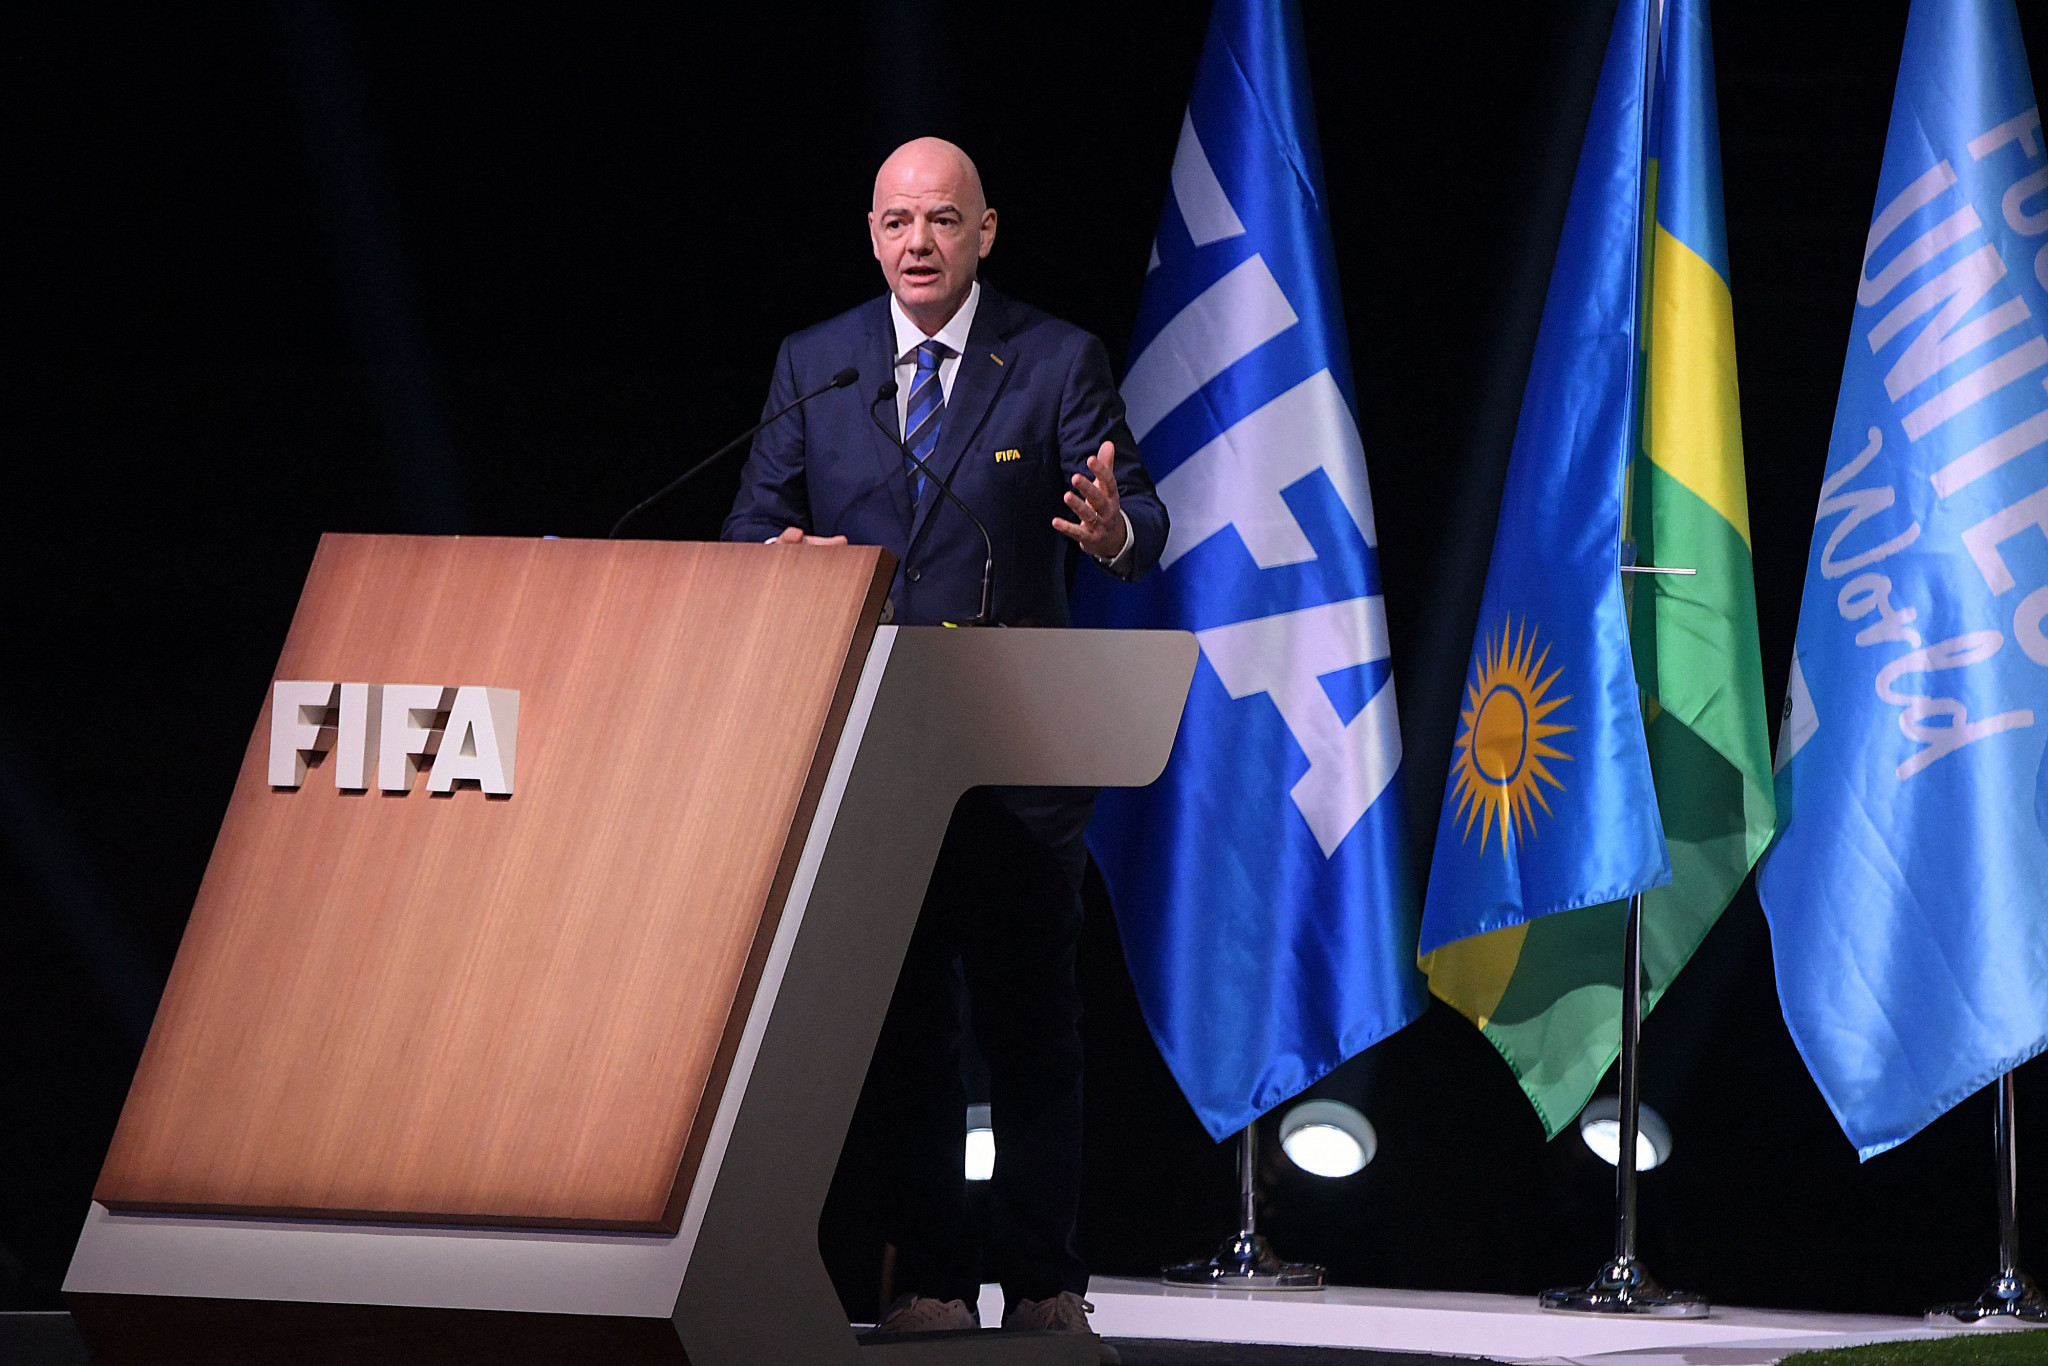 FIFA President Gianni Infantino has criticised double standards after a proposed deal with Visit Saudi for this year's FIFA Women's World Cup in Australia and New Zealand had to be abandoned following criticism ©Getty Images